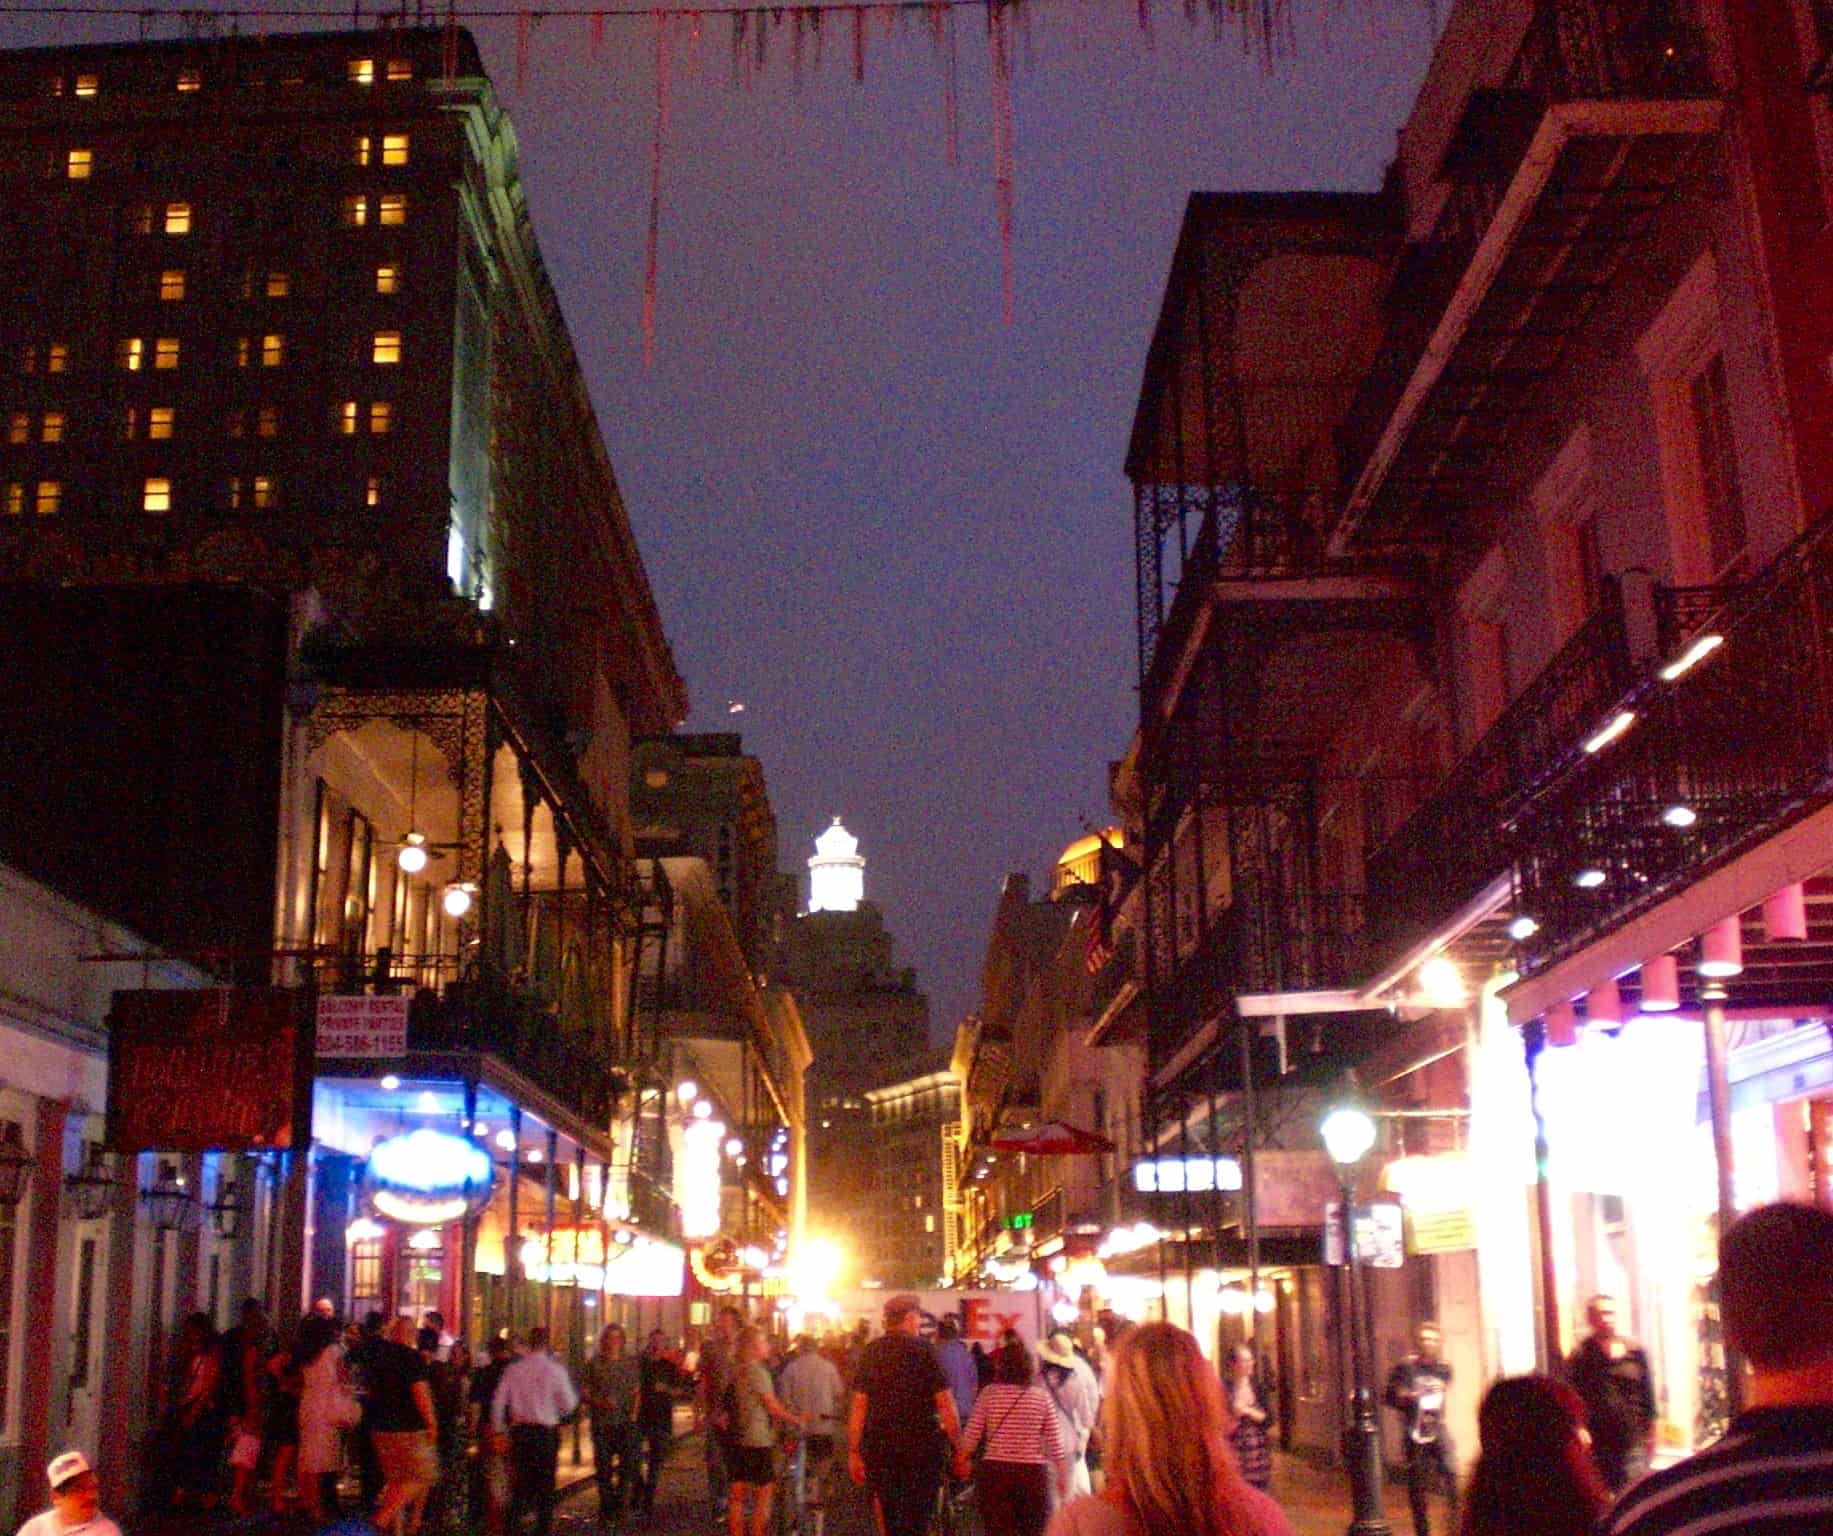 Colourful New Orleans nightlife